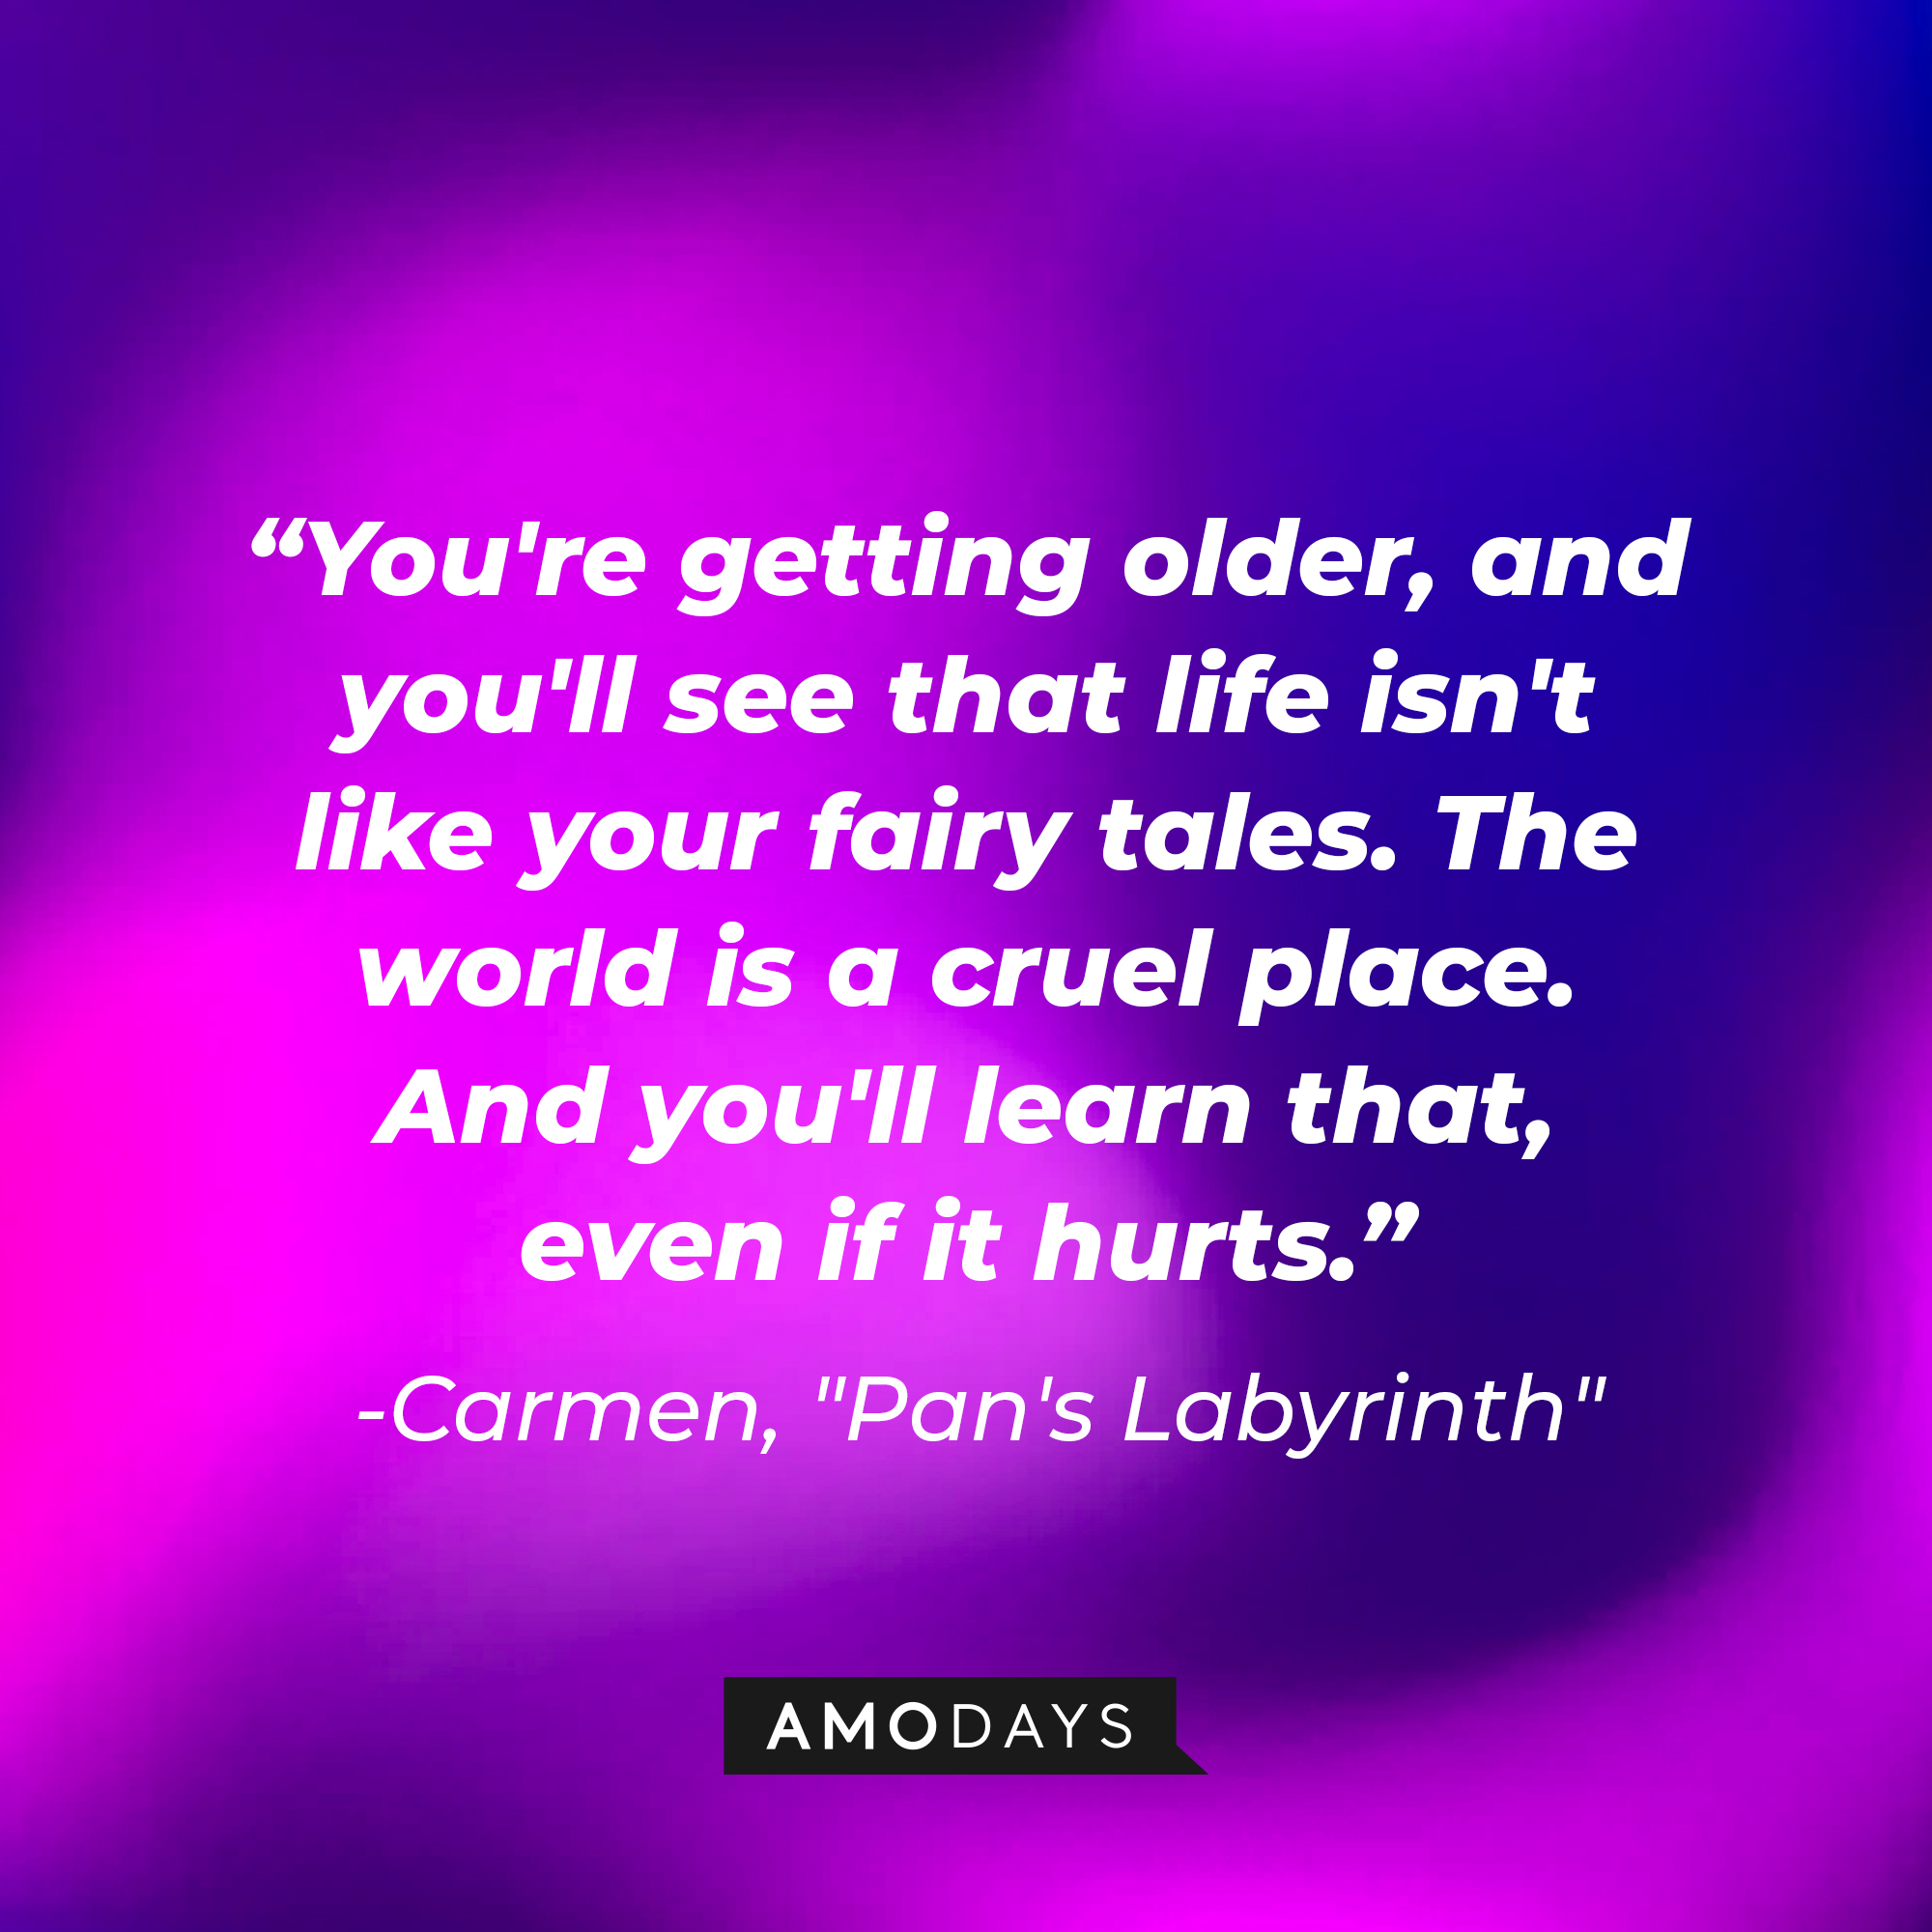 Carmen's quote: "You're getting older, and you'll see that life isn't like your fairy tales. The world is a cruel place. And you'll learn that, even if it hurts." | Image: Amodays